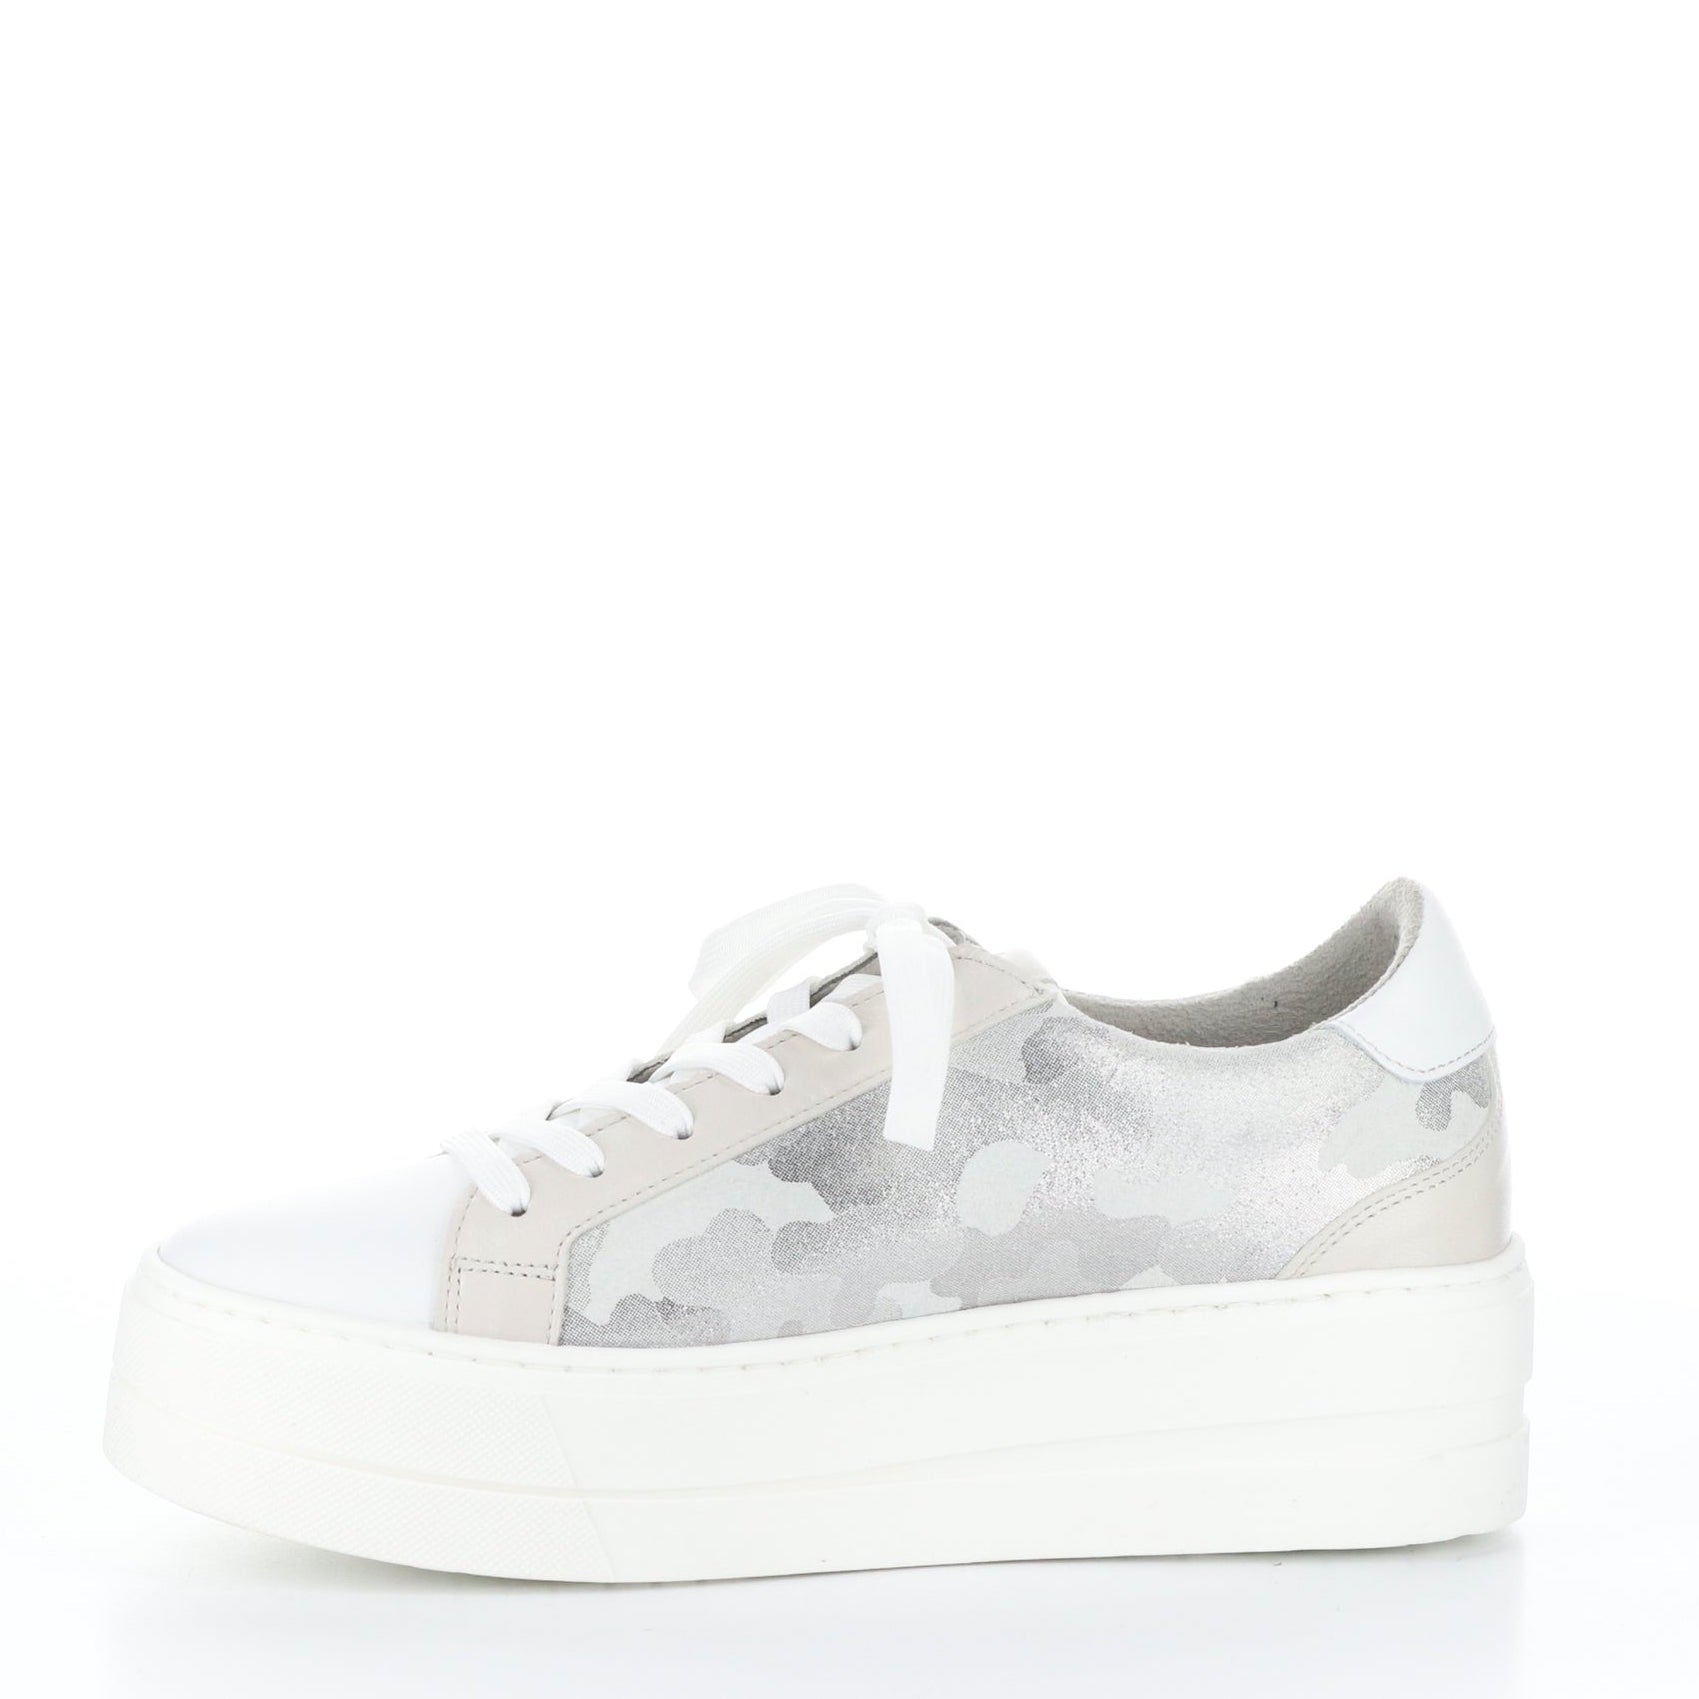 Inner side view of the the bos & co mardi sneaker. This sneaker is white with grey/silver camo on the sides. The sneaker has a platform sole and a lace up front.